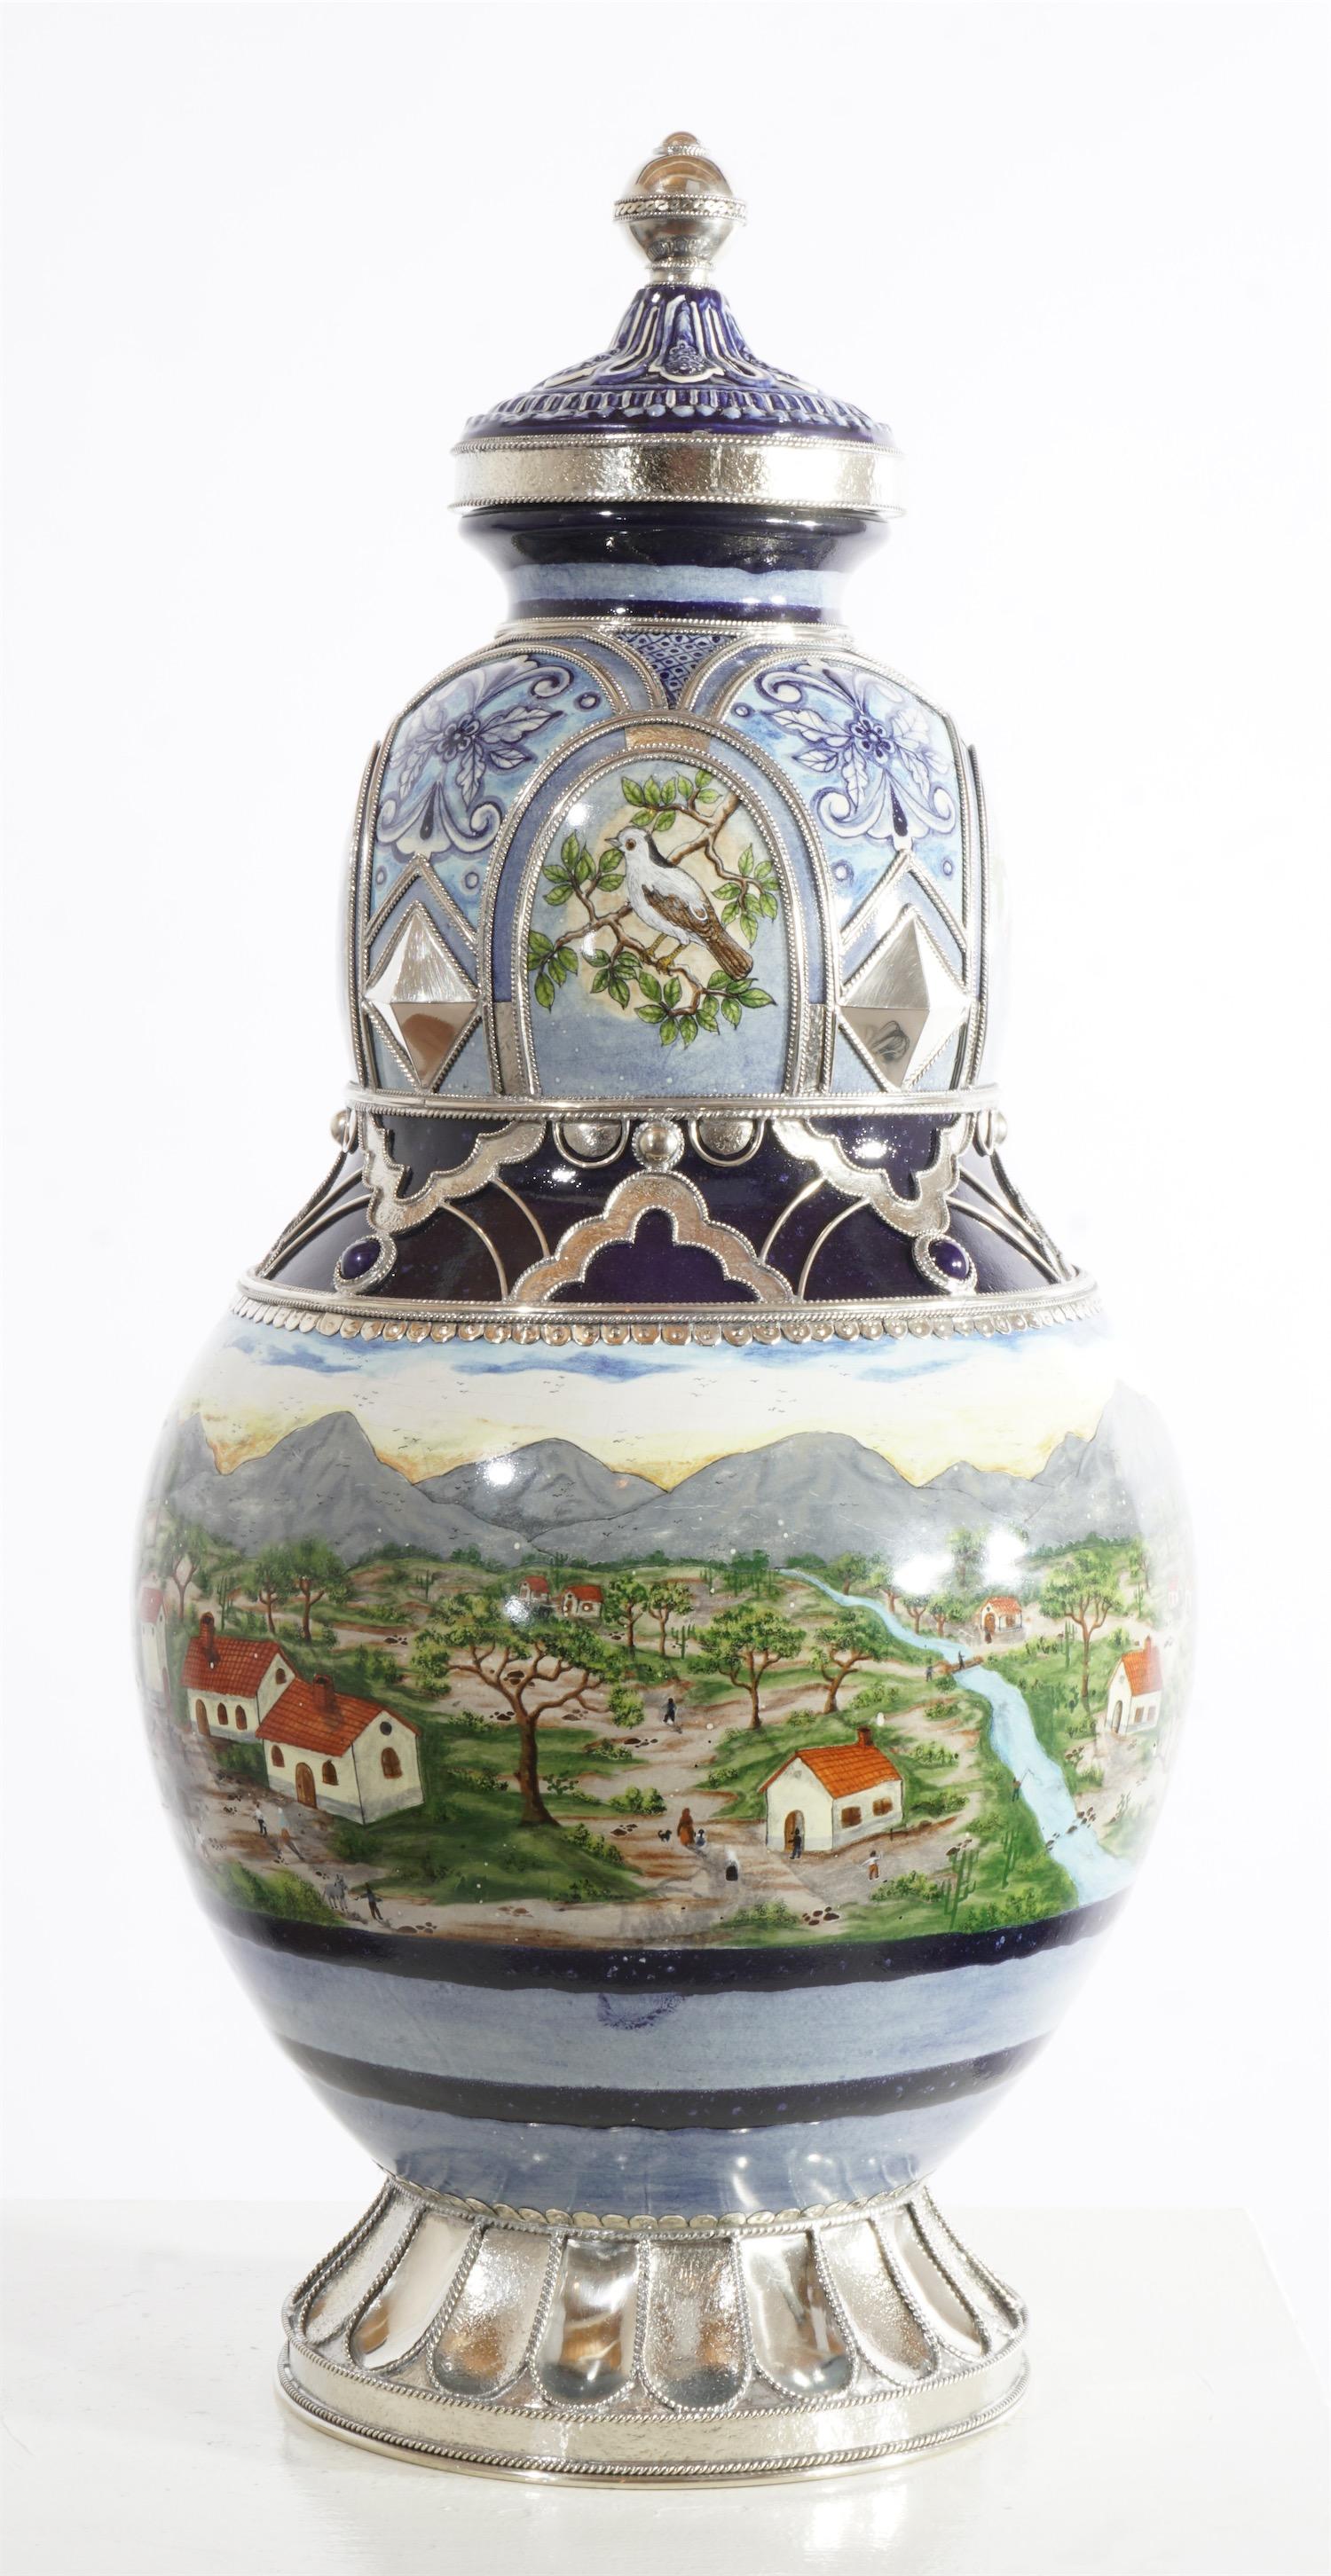 Other Mexican Landscape Jar Ceramic and White Metal ‘Alpaca’, One of a Kind